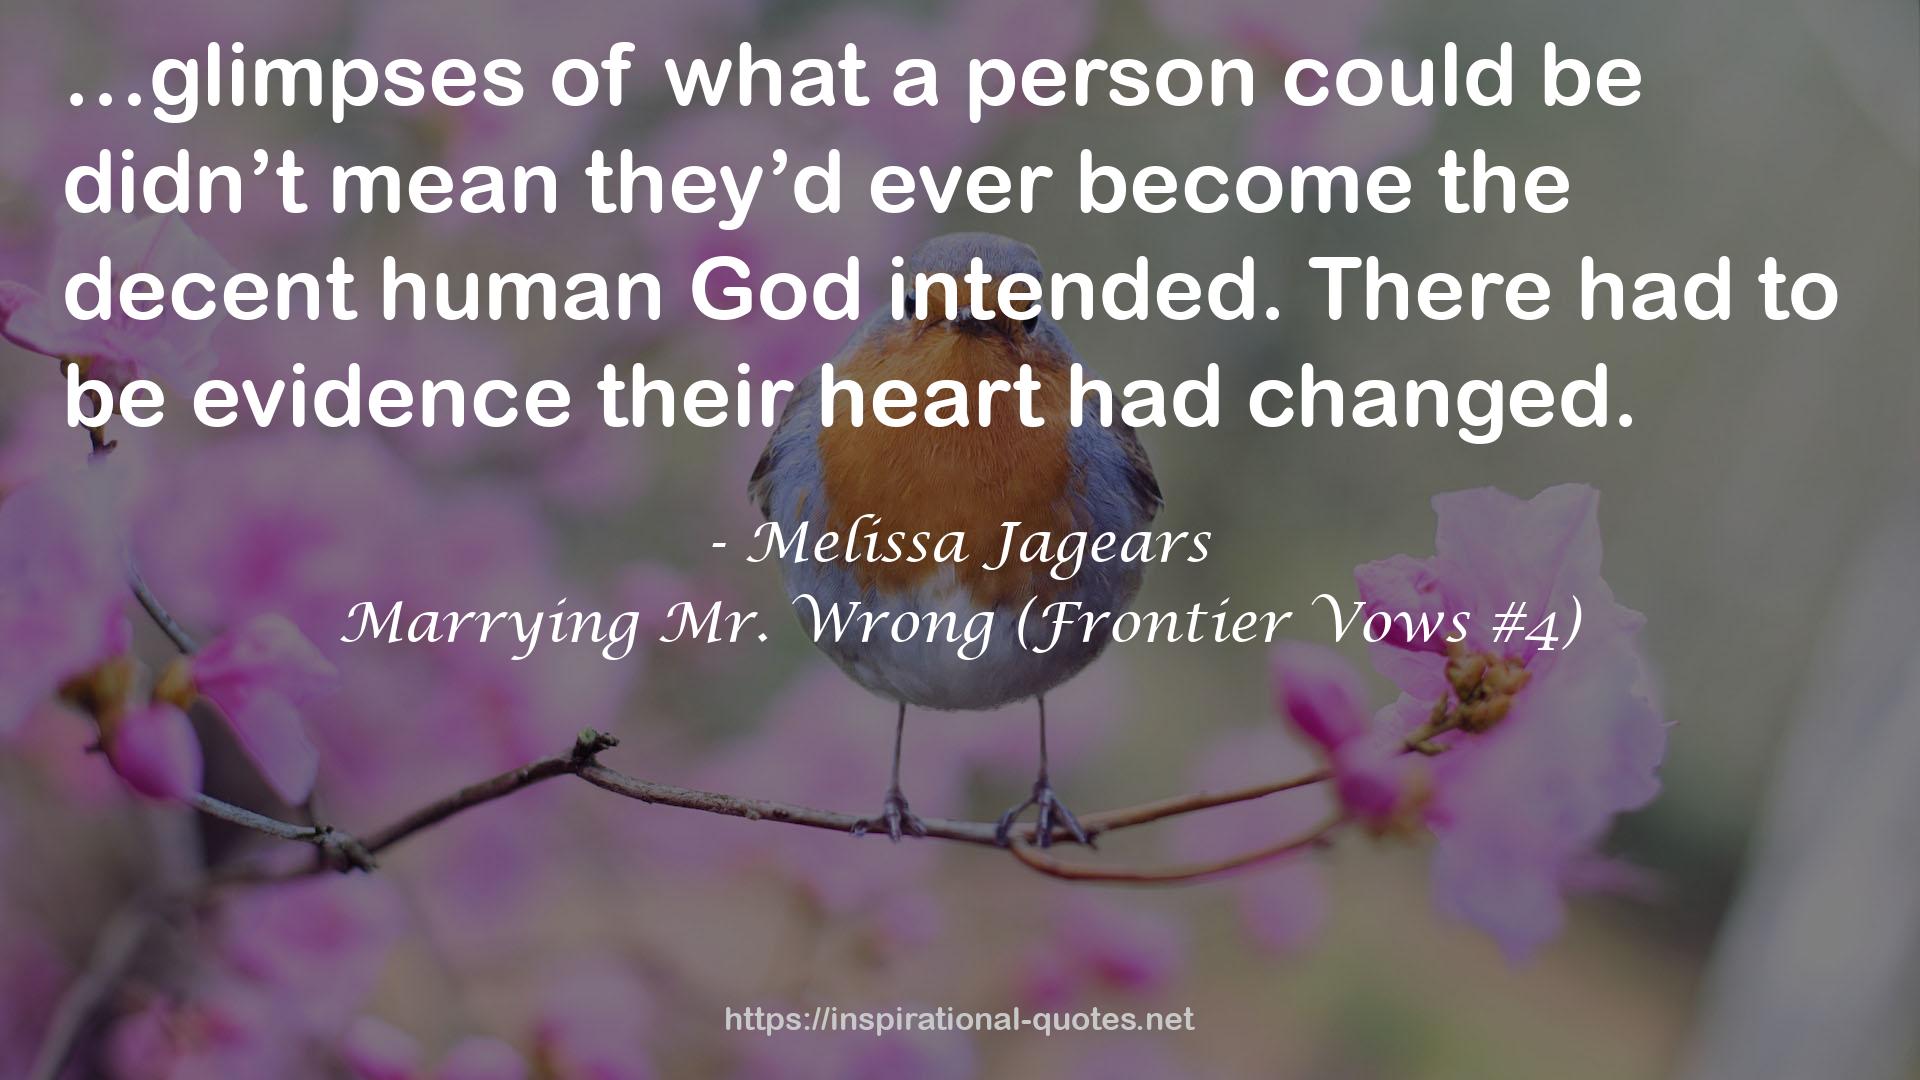 Marrying Mr. Wrong (Frontier Vows #4) QUOTES